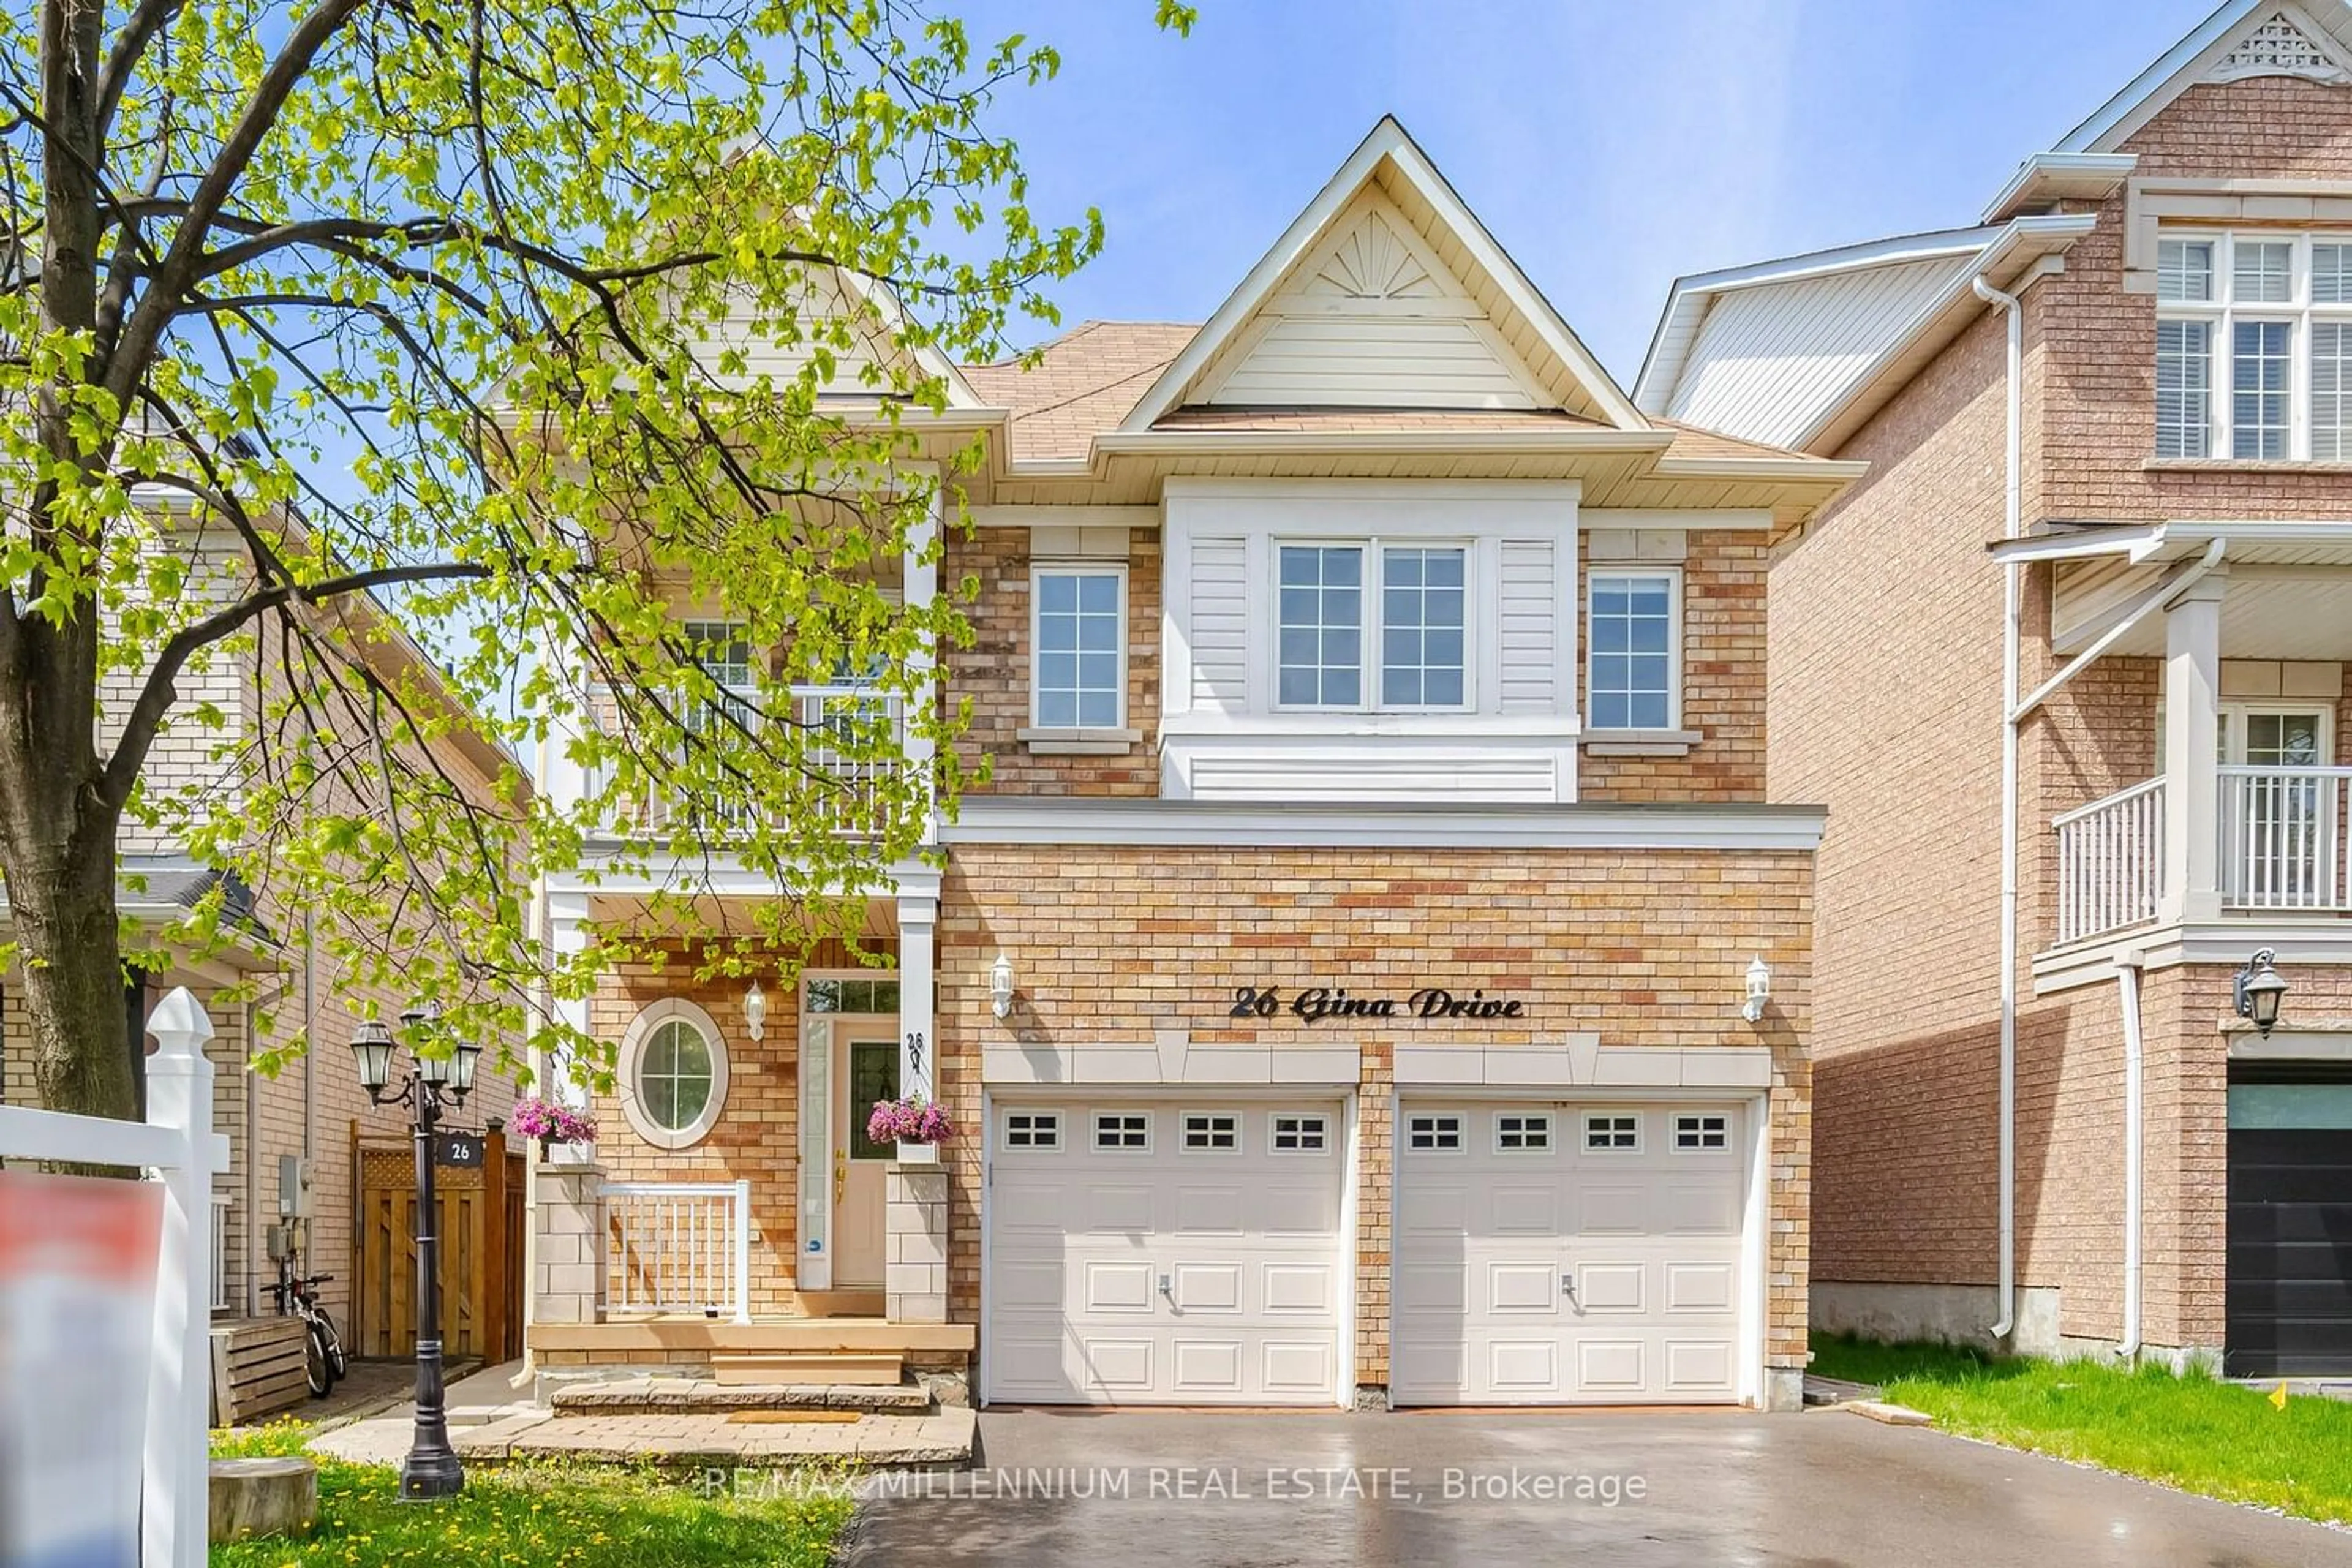 Home with brick exterior material for 26 Gina Dr, Vaughan Ontario L6A 3X2